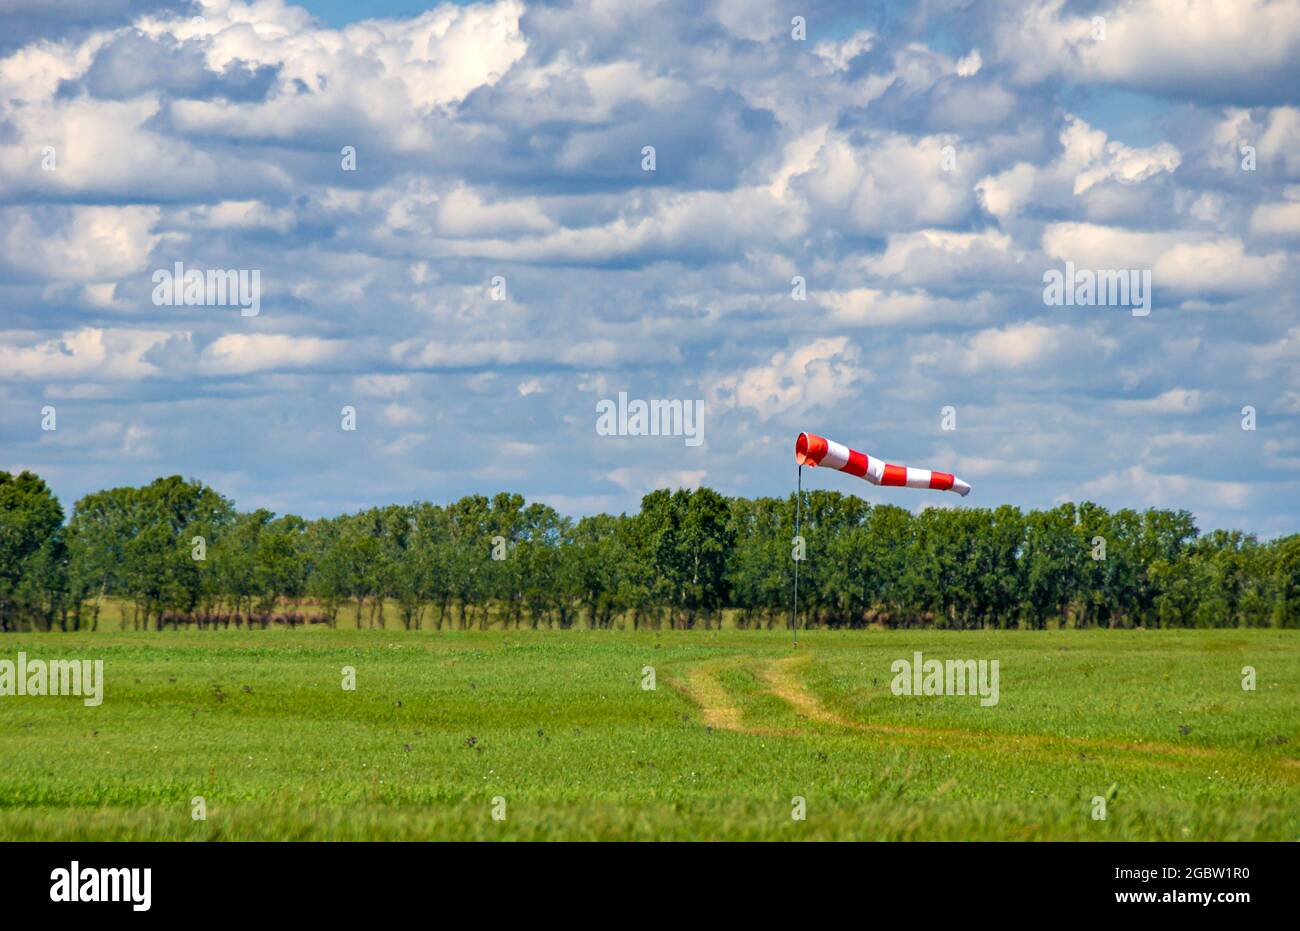 a windsock in the form of a red and white fabric cone is fully deployed on the airfield of the airfield Stock Photo